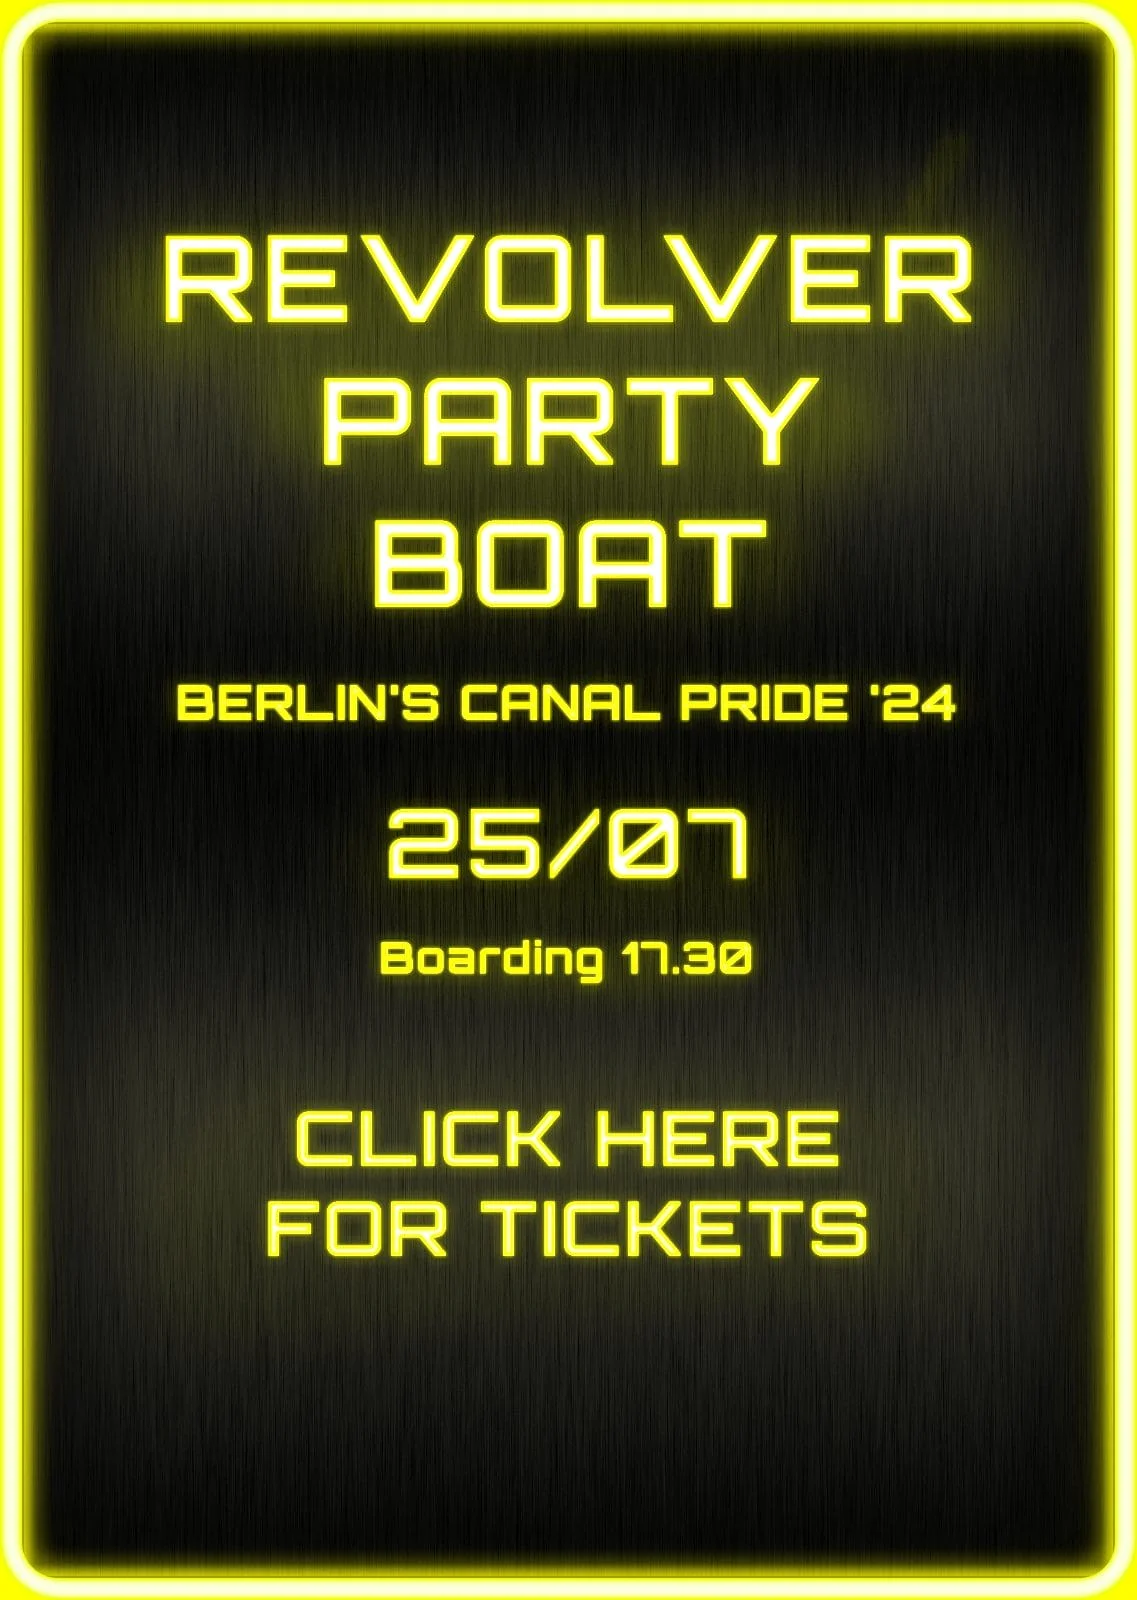 Revolver Party - SUPERQUEEROS party advertisement. 3 people in superhero outfits standing in water, behind them are lightening strikes in blue, yellow, and magenta.